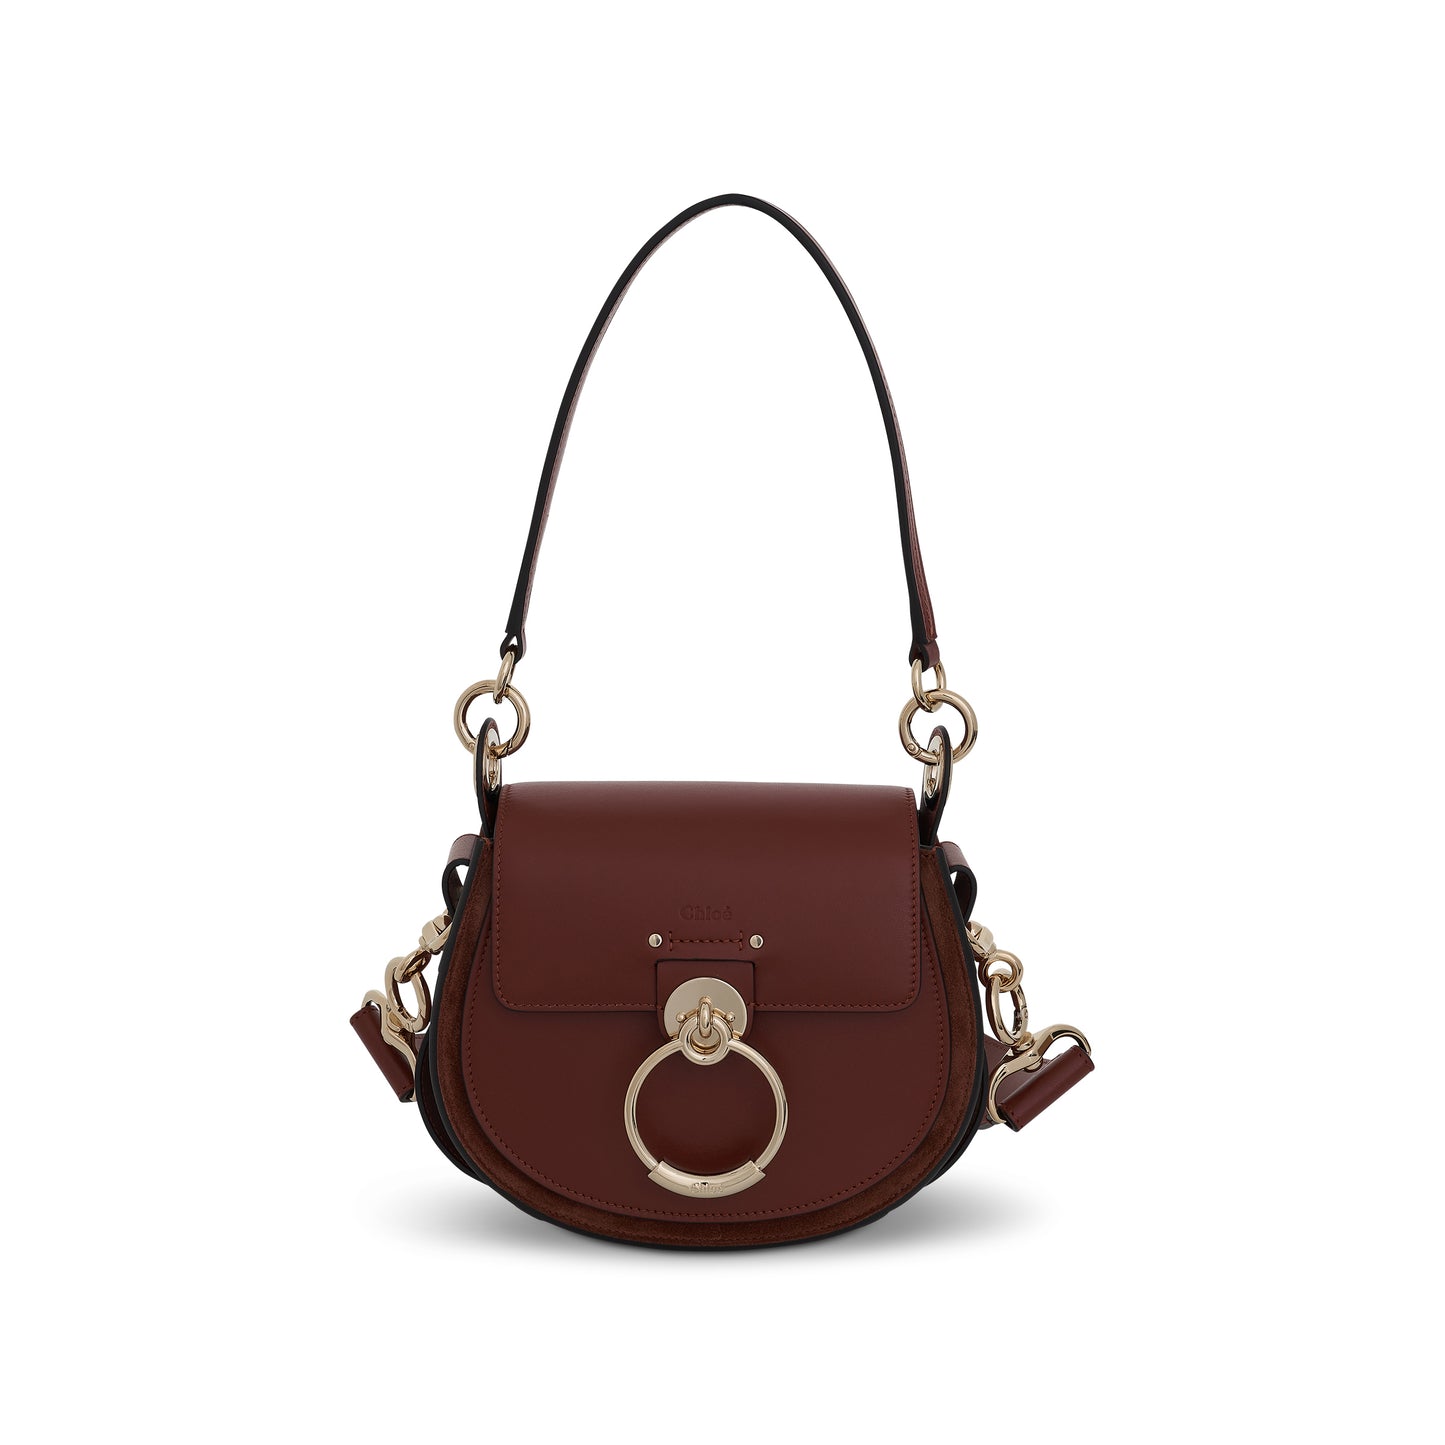 Small Tess Bag in Shiny & Suede Calfskin in Autumnal Brown